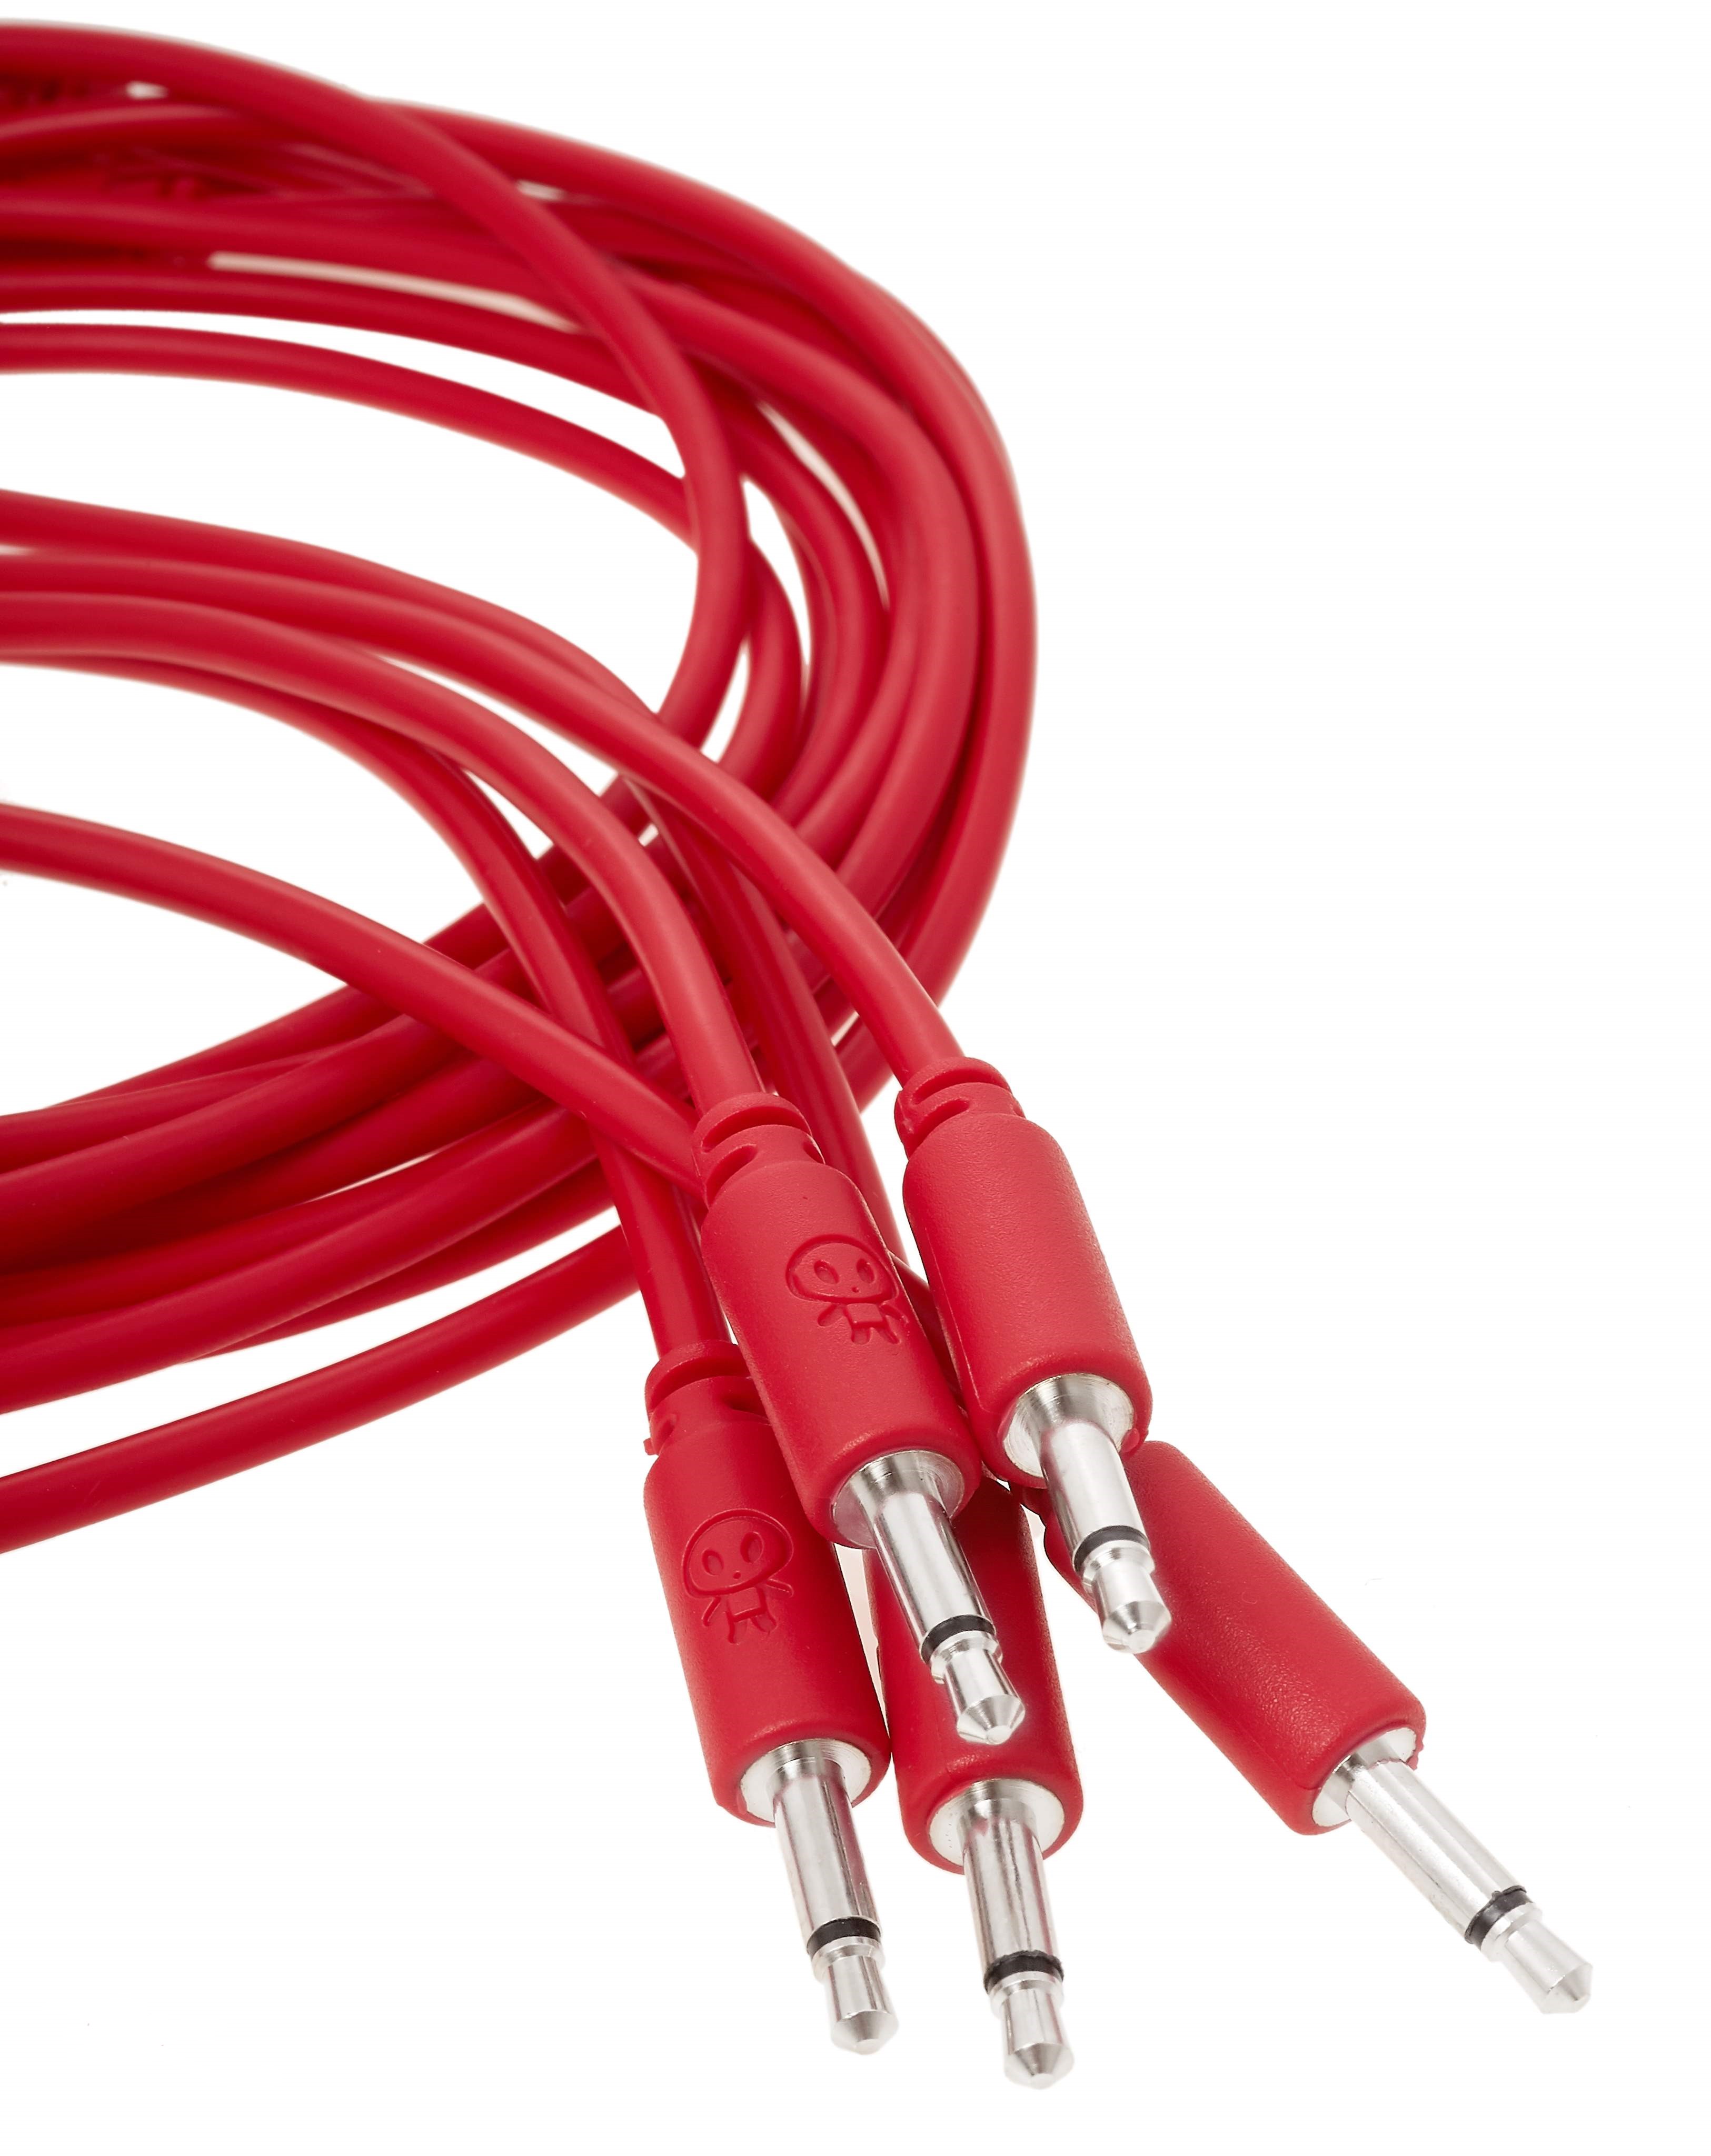 Erica Synths Eurorack Patch Cables 10cm, 5 Pcs Red по цене 740 ₽